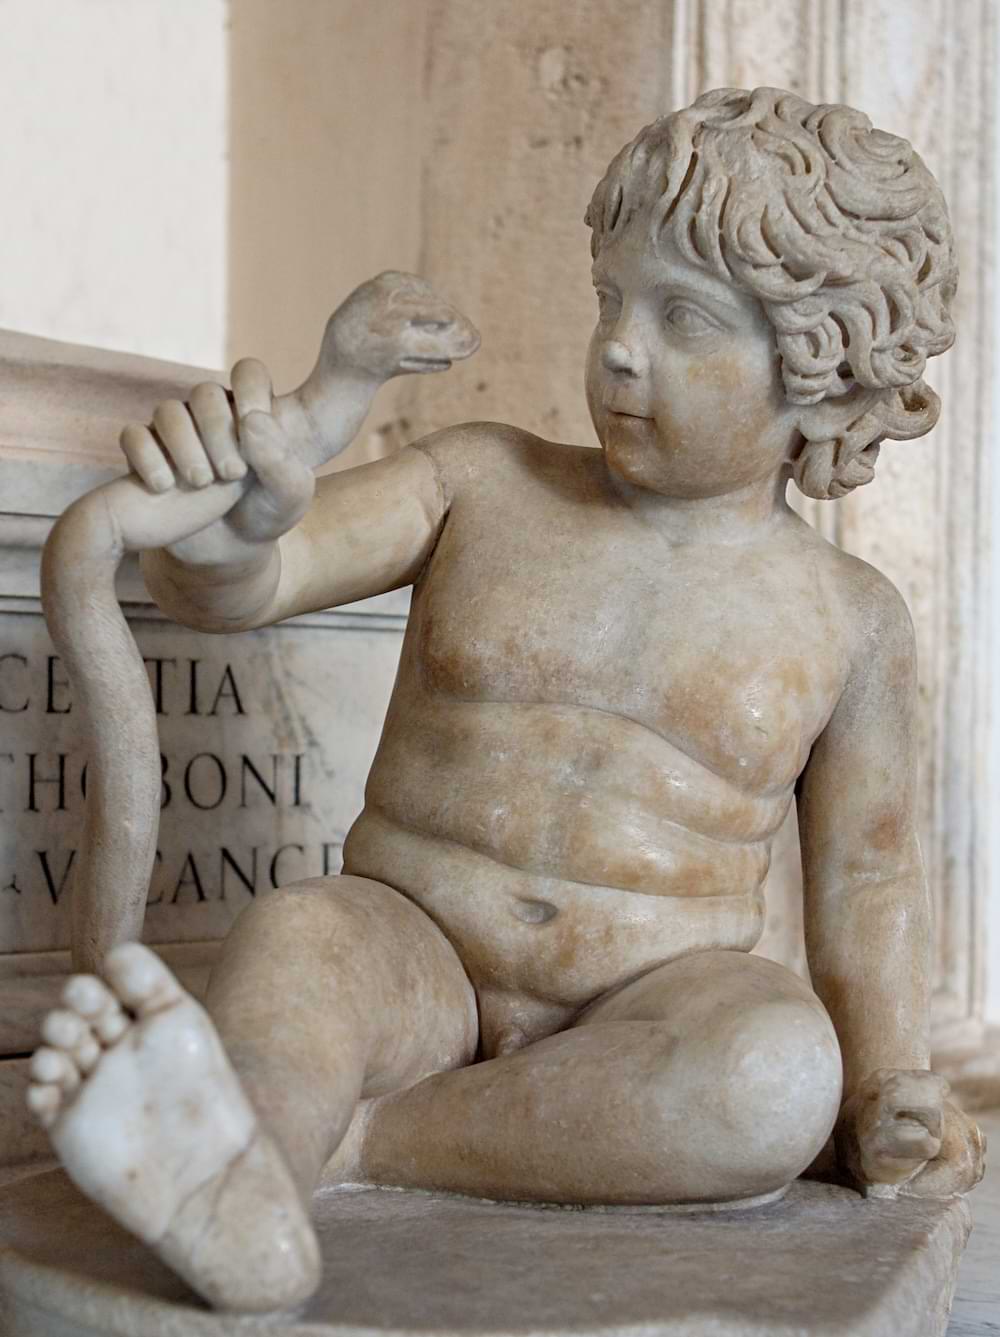 Baby Hercules strangling a snake sent to kill him in his cradle, 2nd century CE